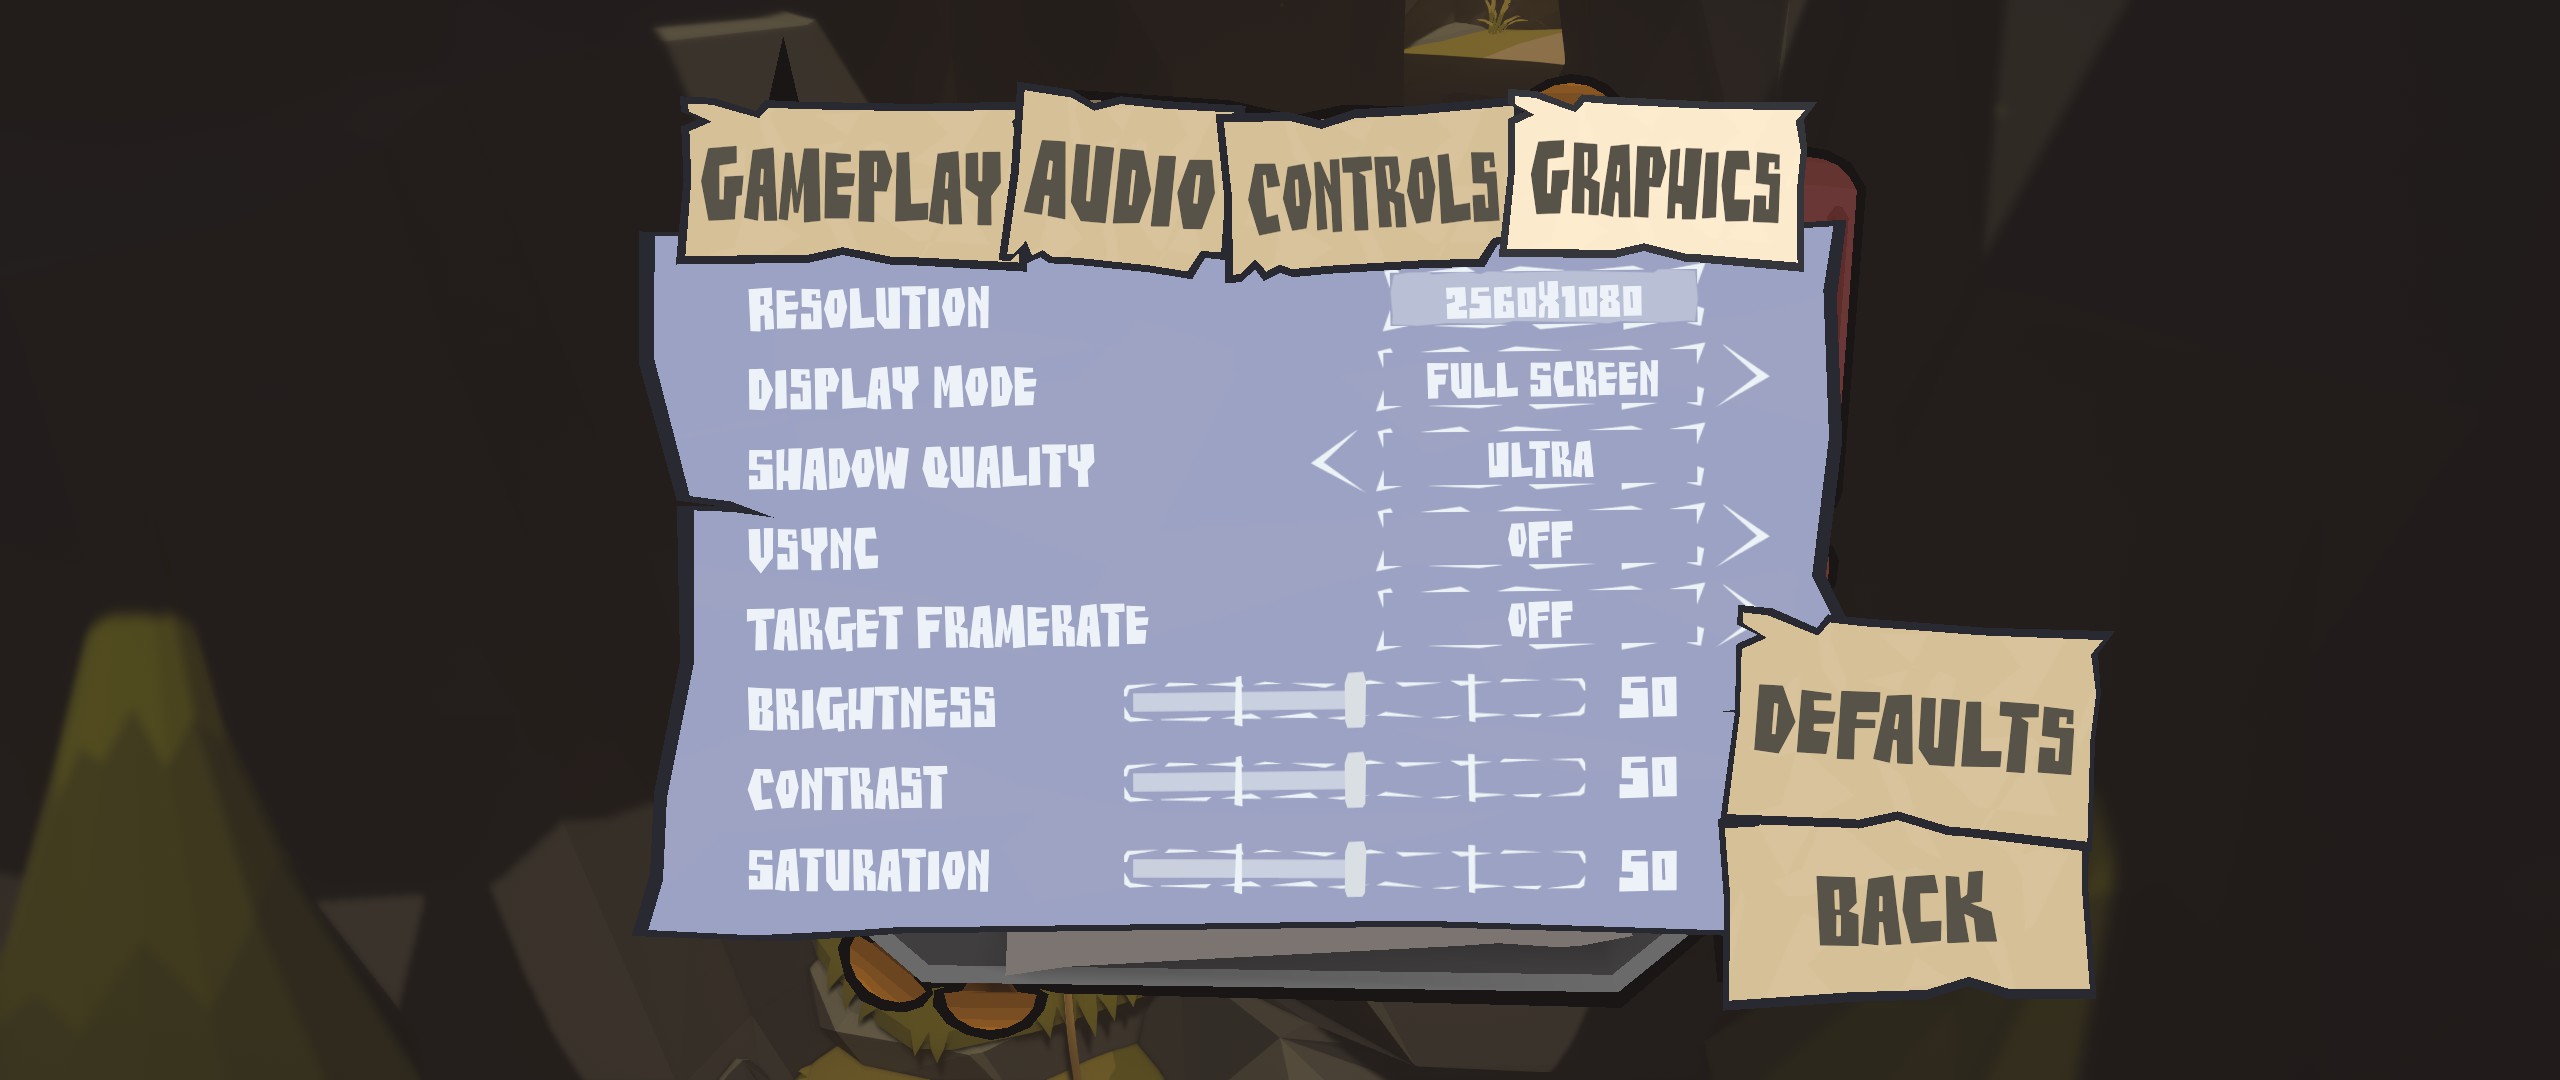 The graphical options are very simple